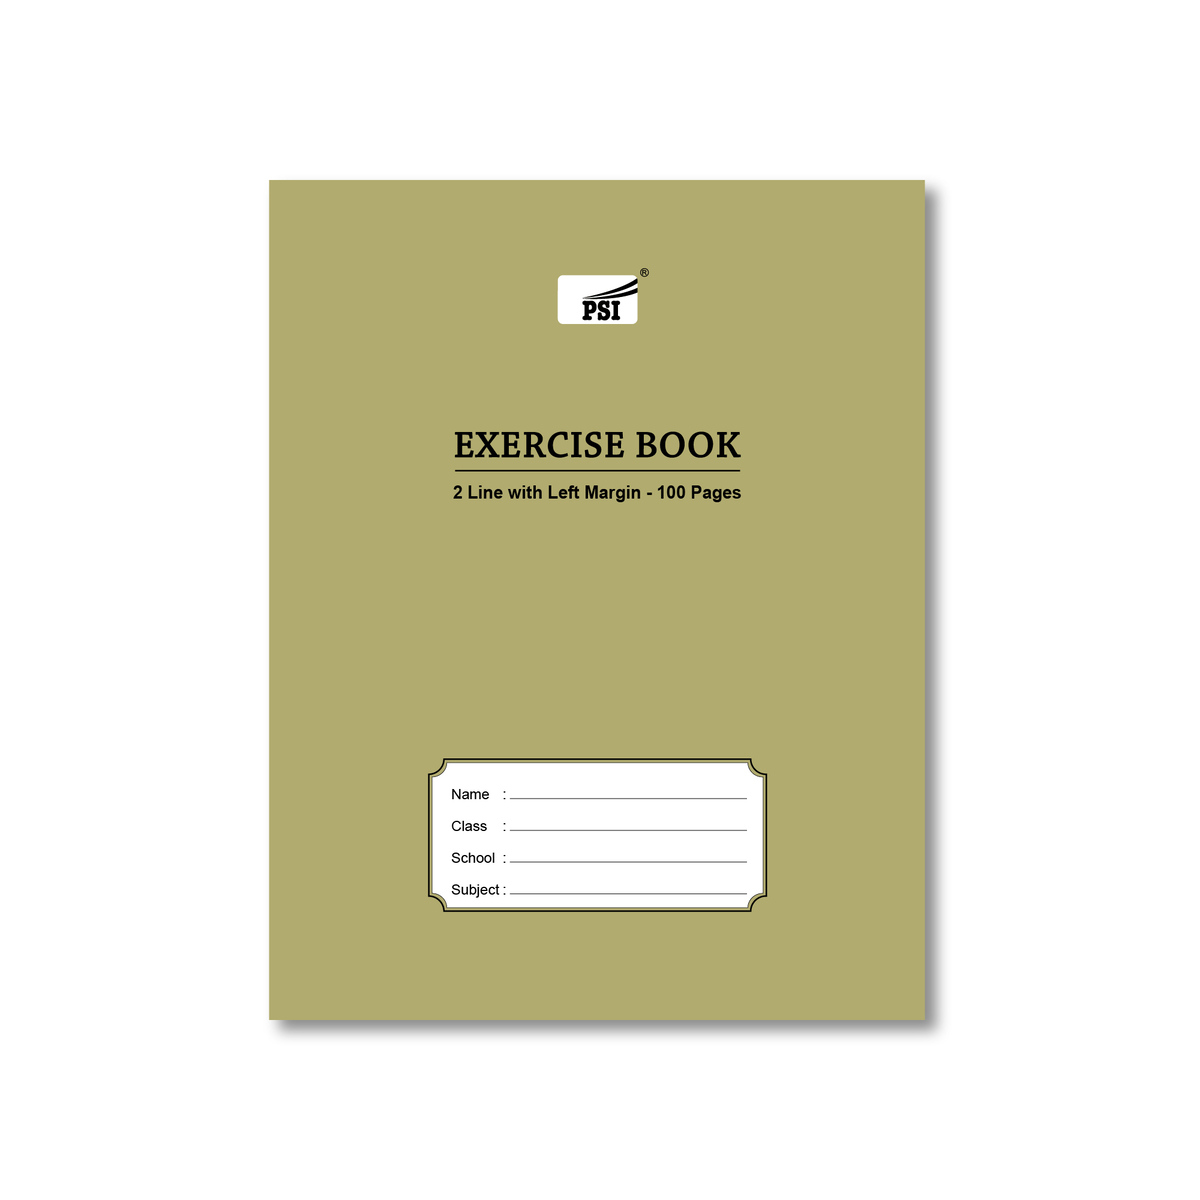 PSI Exercise Book 2 Line With Left Margin 100 Pages 2LM100